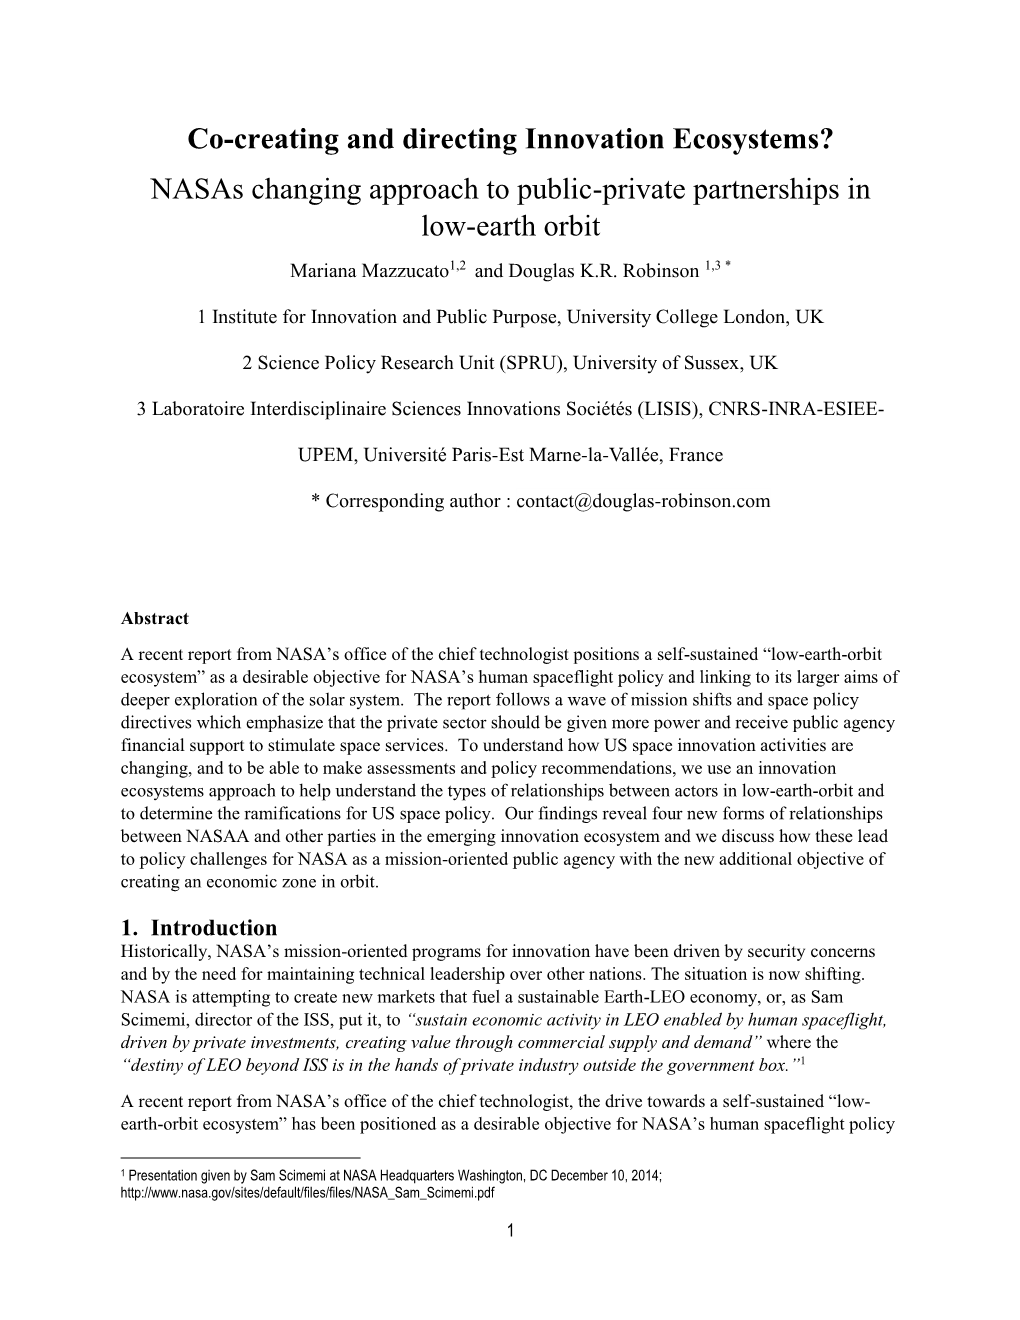 Nasas Changing Approach to Public-Private Partnerships in Low-Earth Orbit Mariana Mazzucato1,2 and Douglas K.R